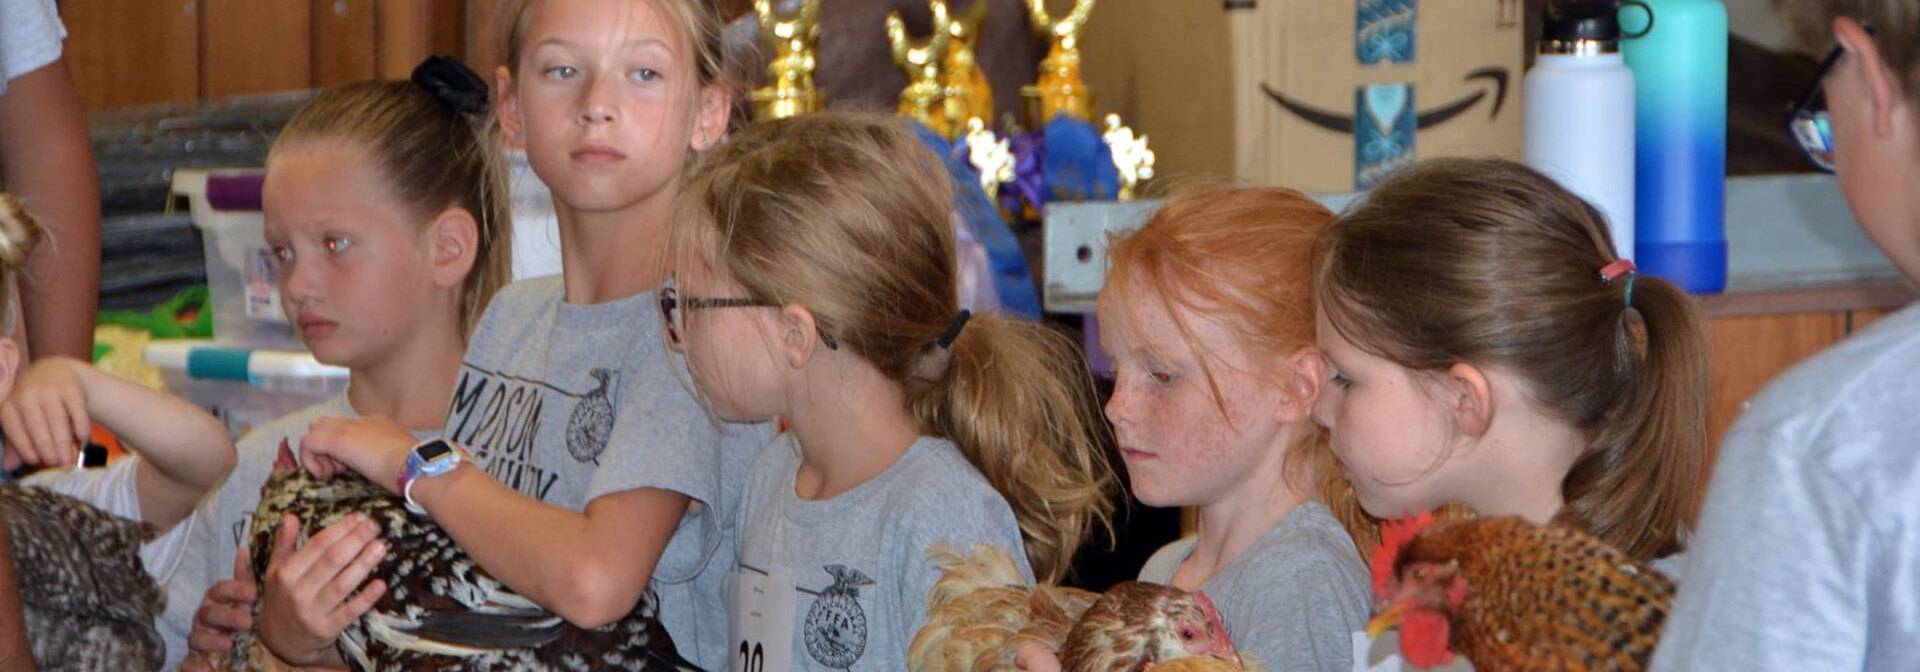 Five young girls showing chickens at the Madison County Fair